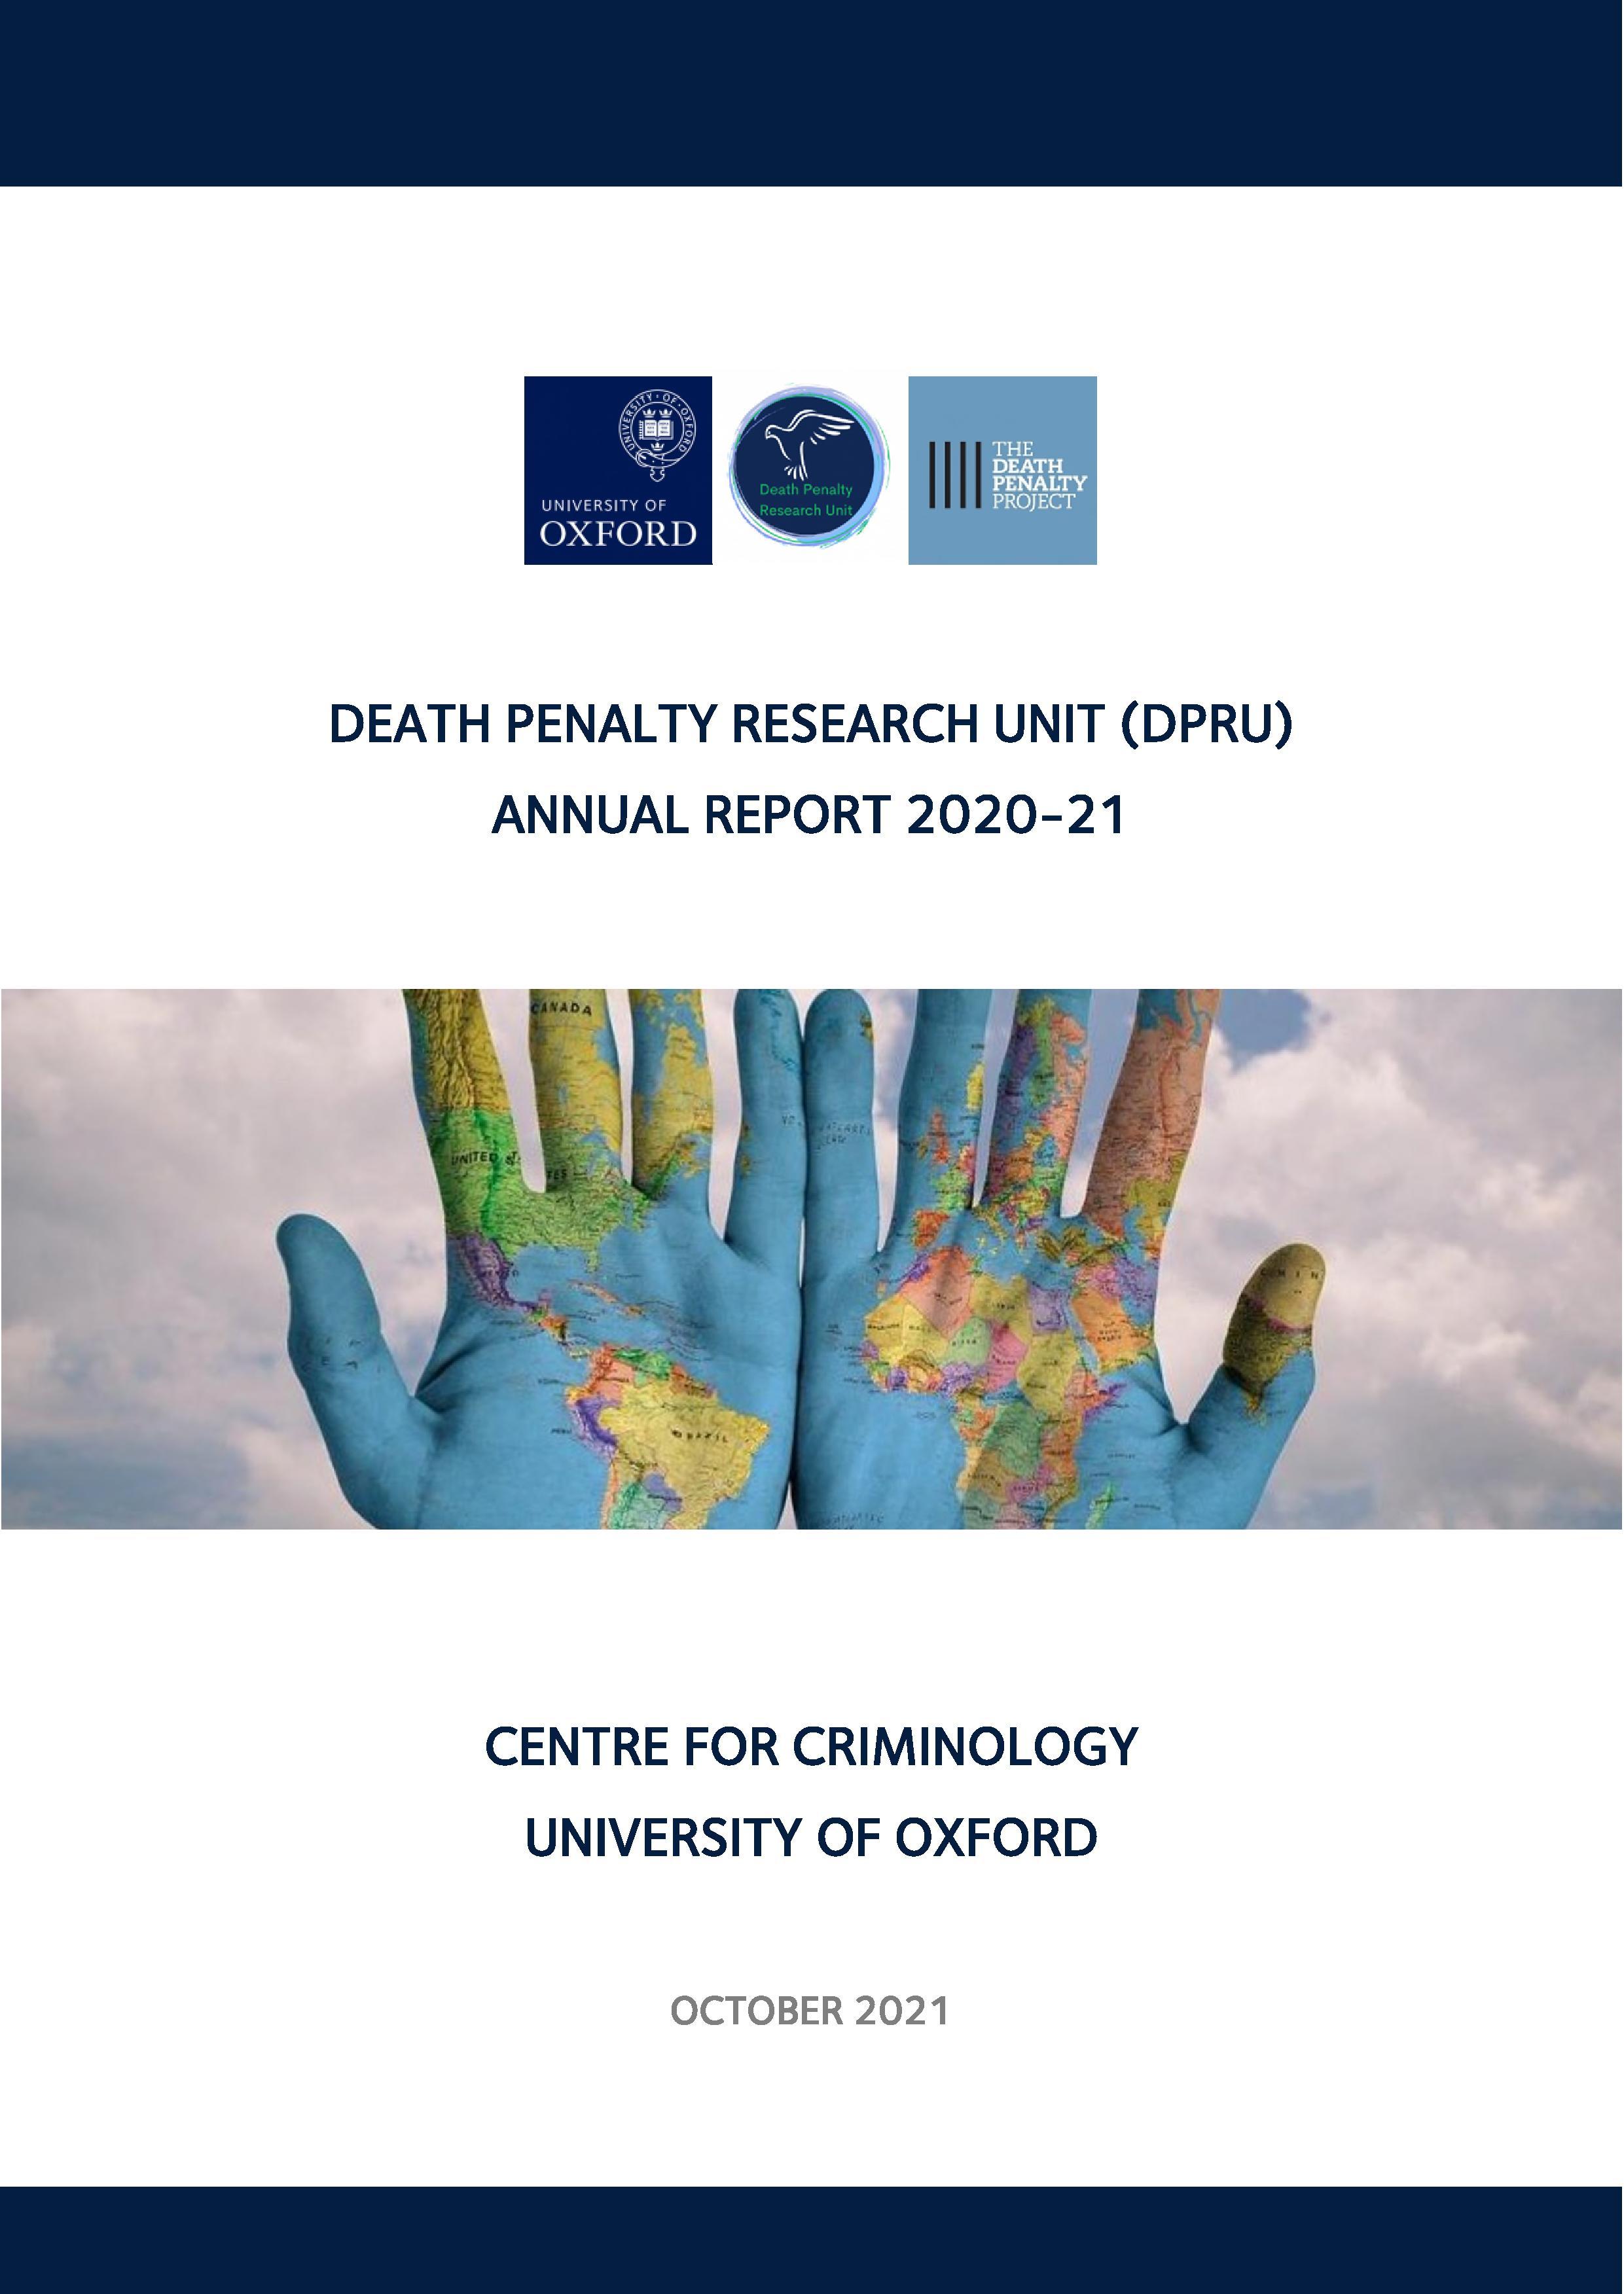 The cover of the DPRU Annual Report 2020-21